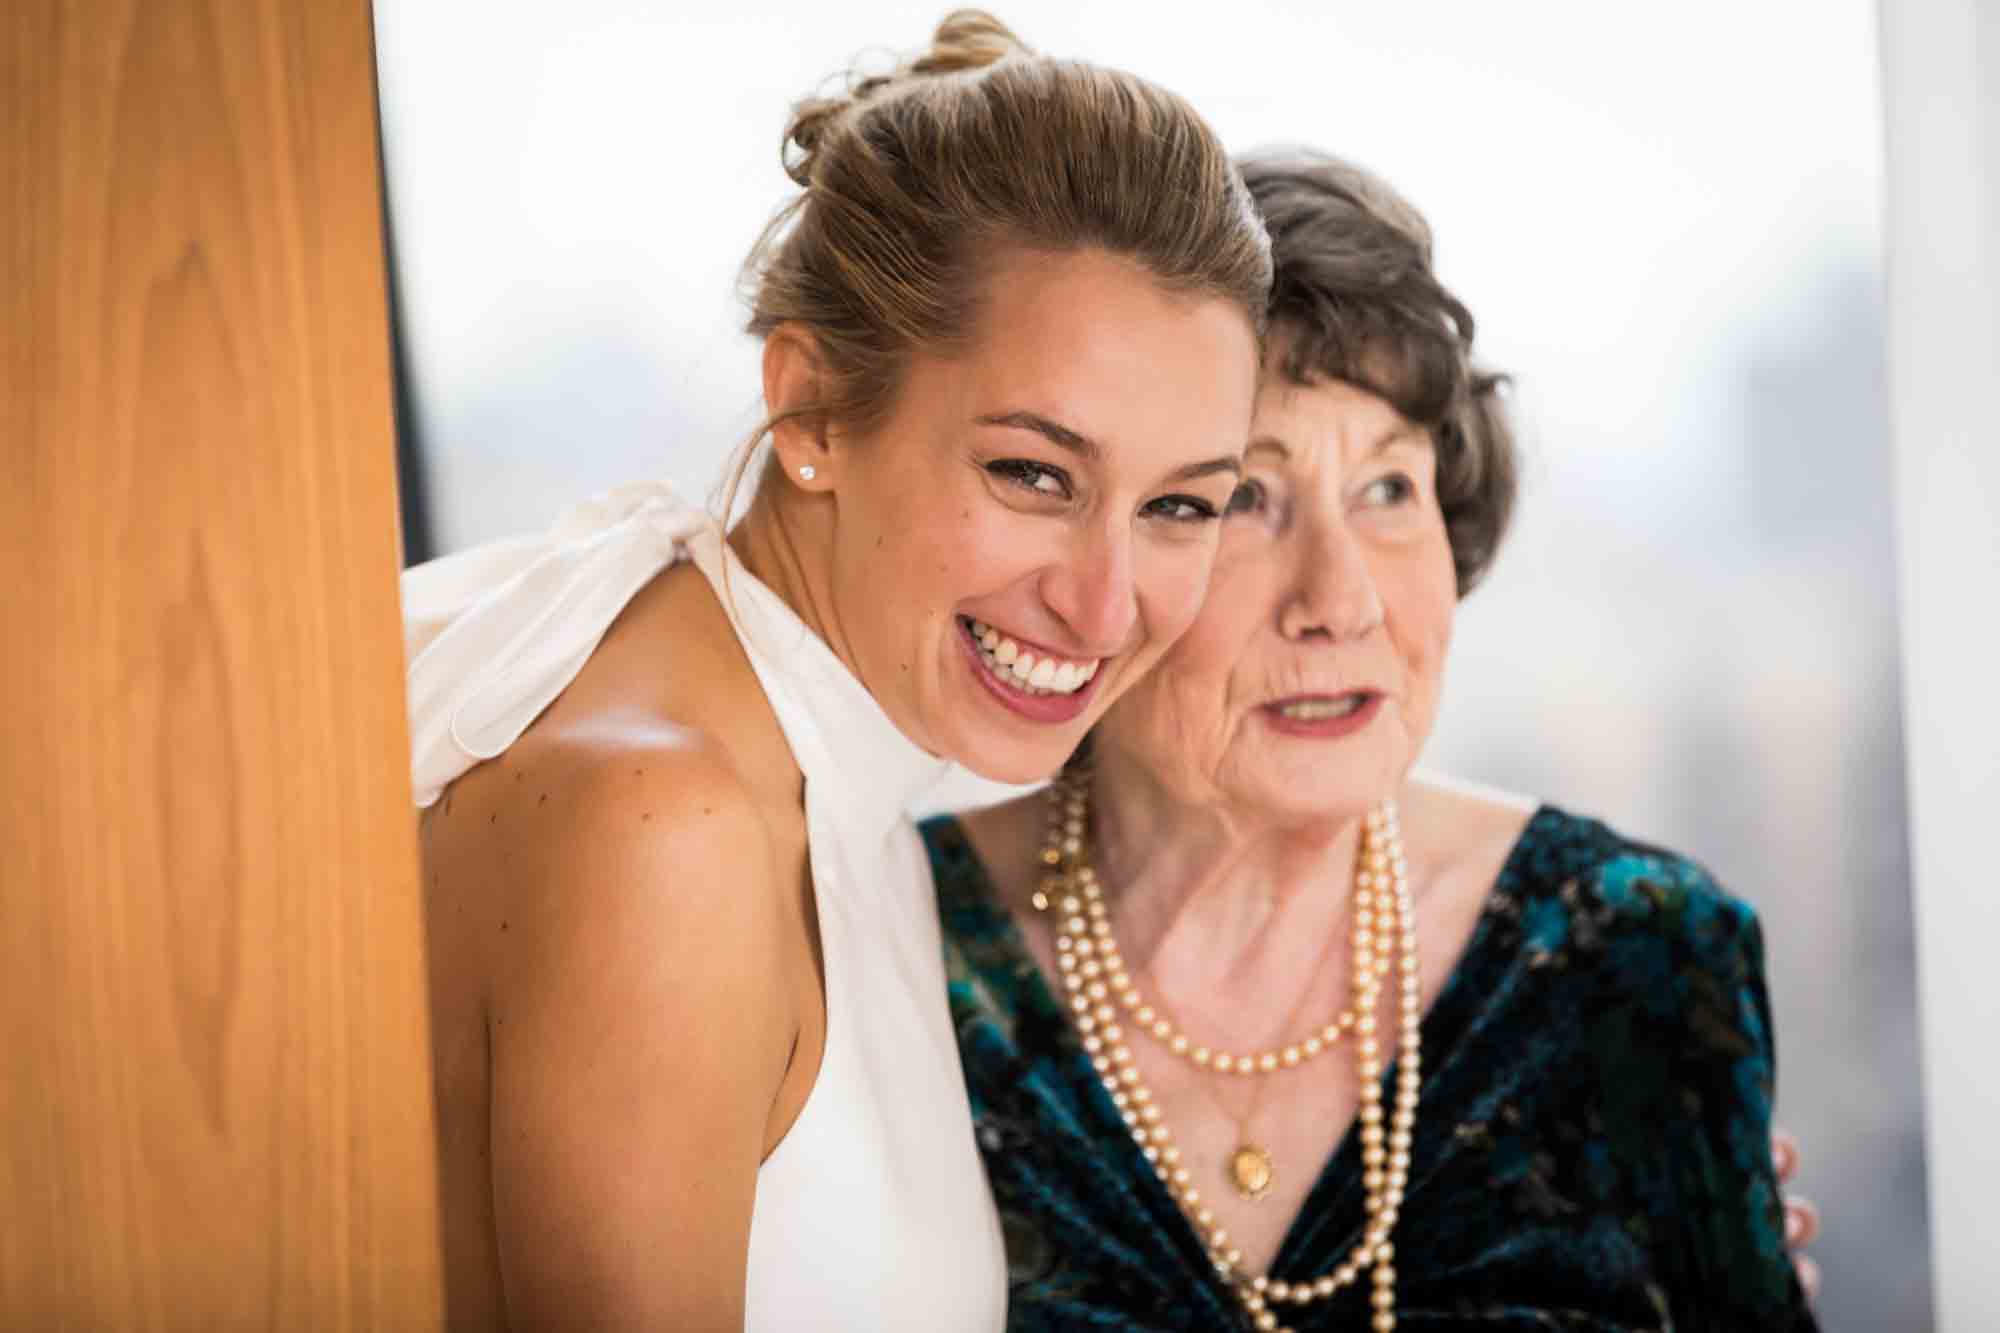 Bride smiling with older woman before a Public Hotel wedding